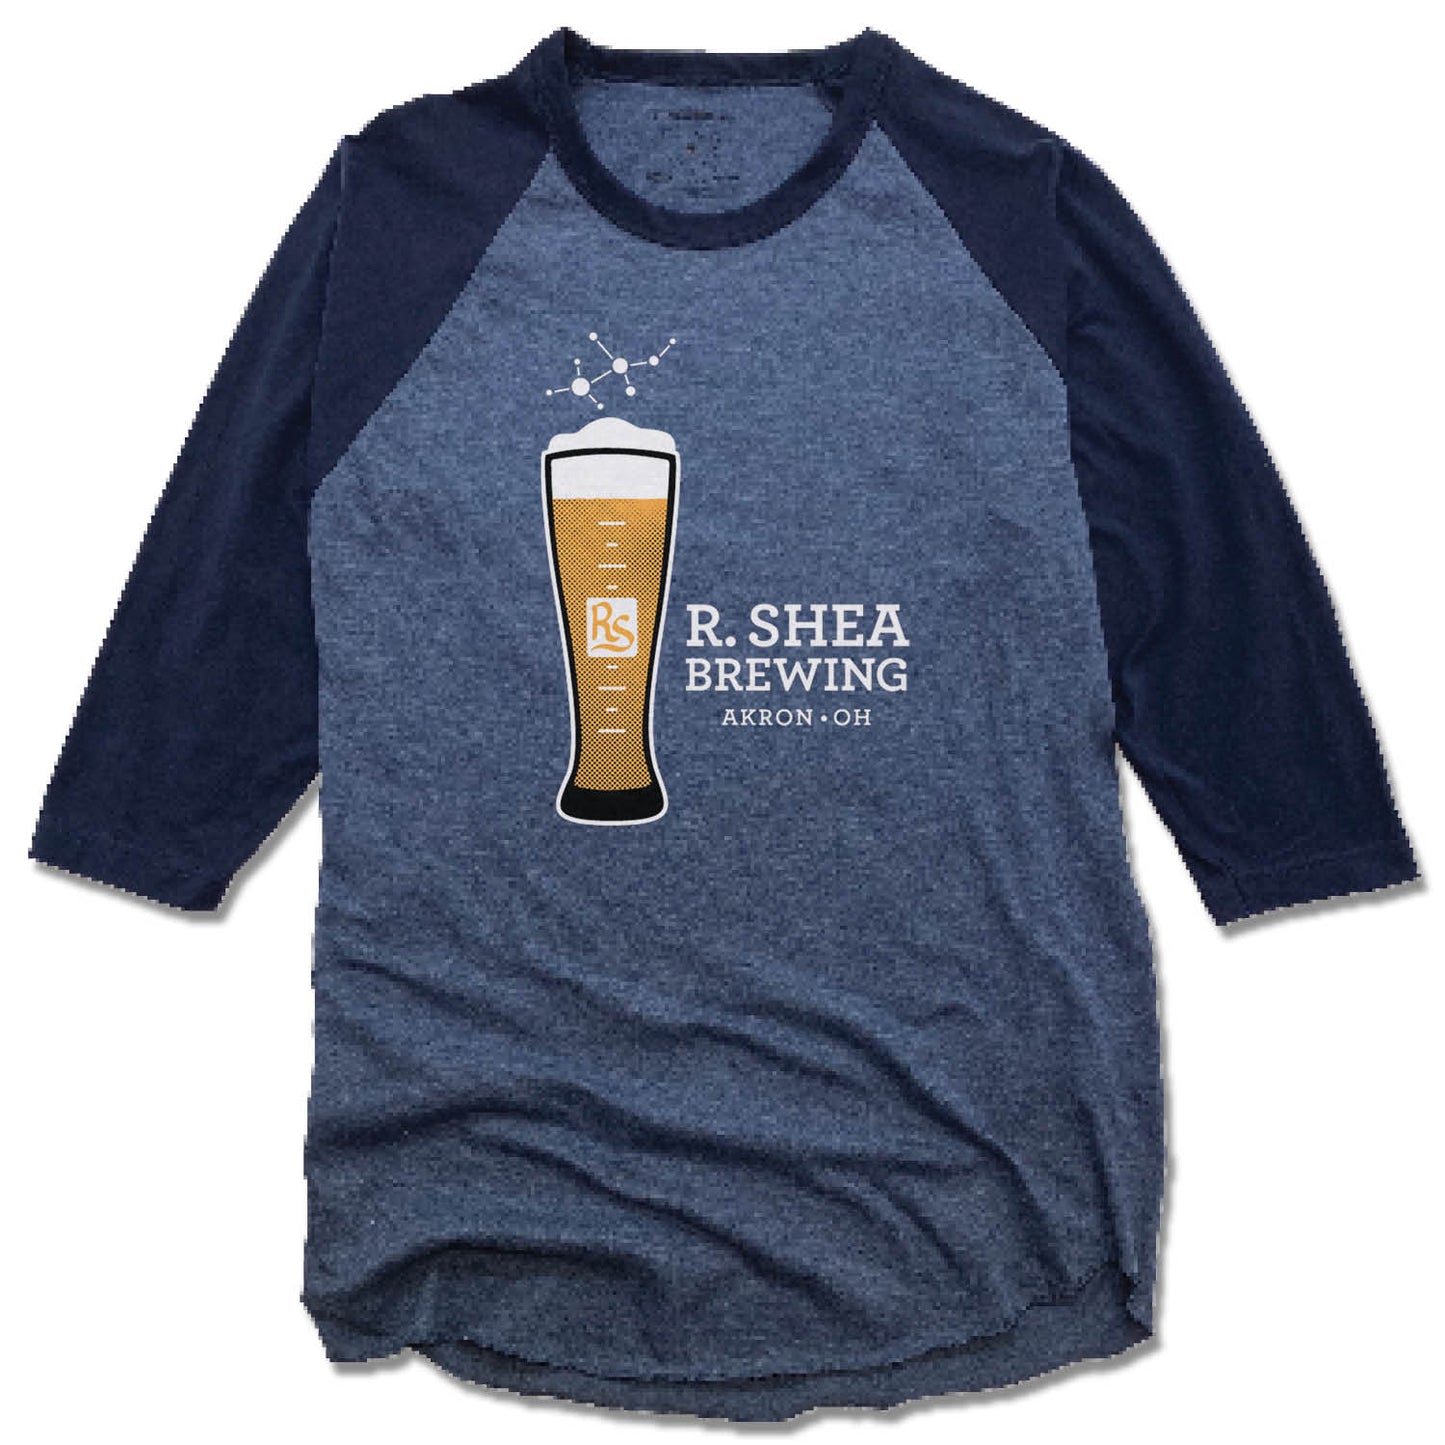 R. SHEA BREWING. | DENIM/NAVY 3/4 SLEEVE | BREWED TO A SCIENCE